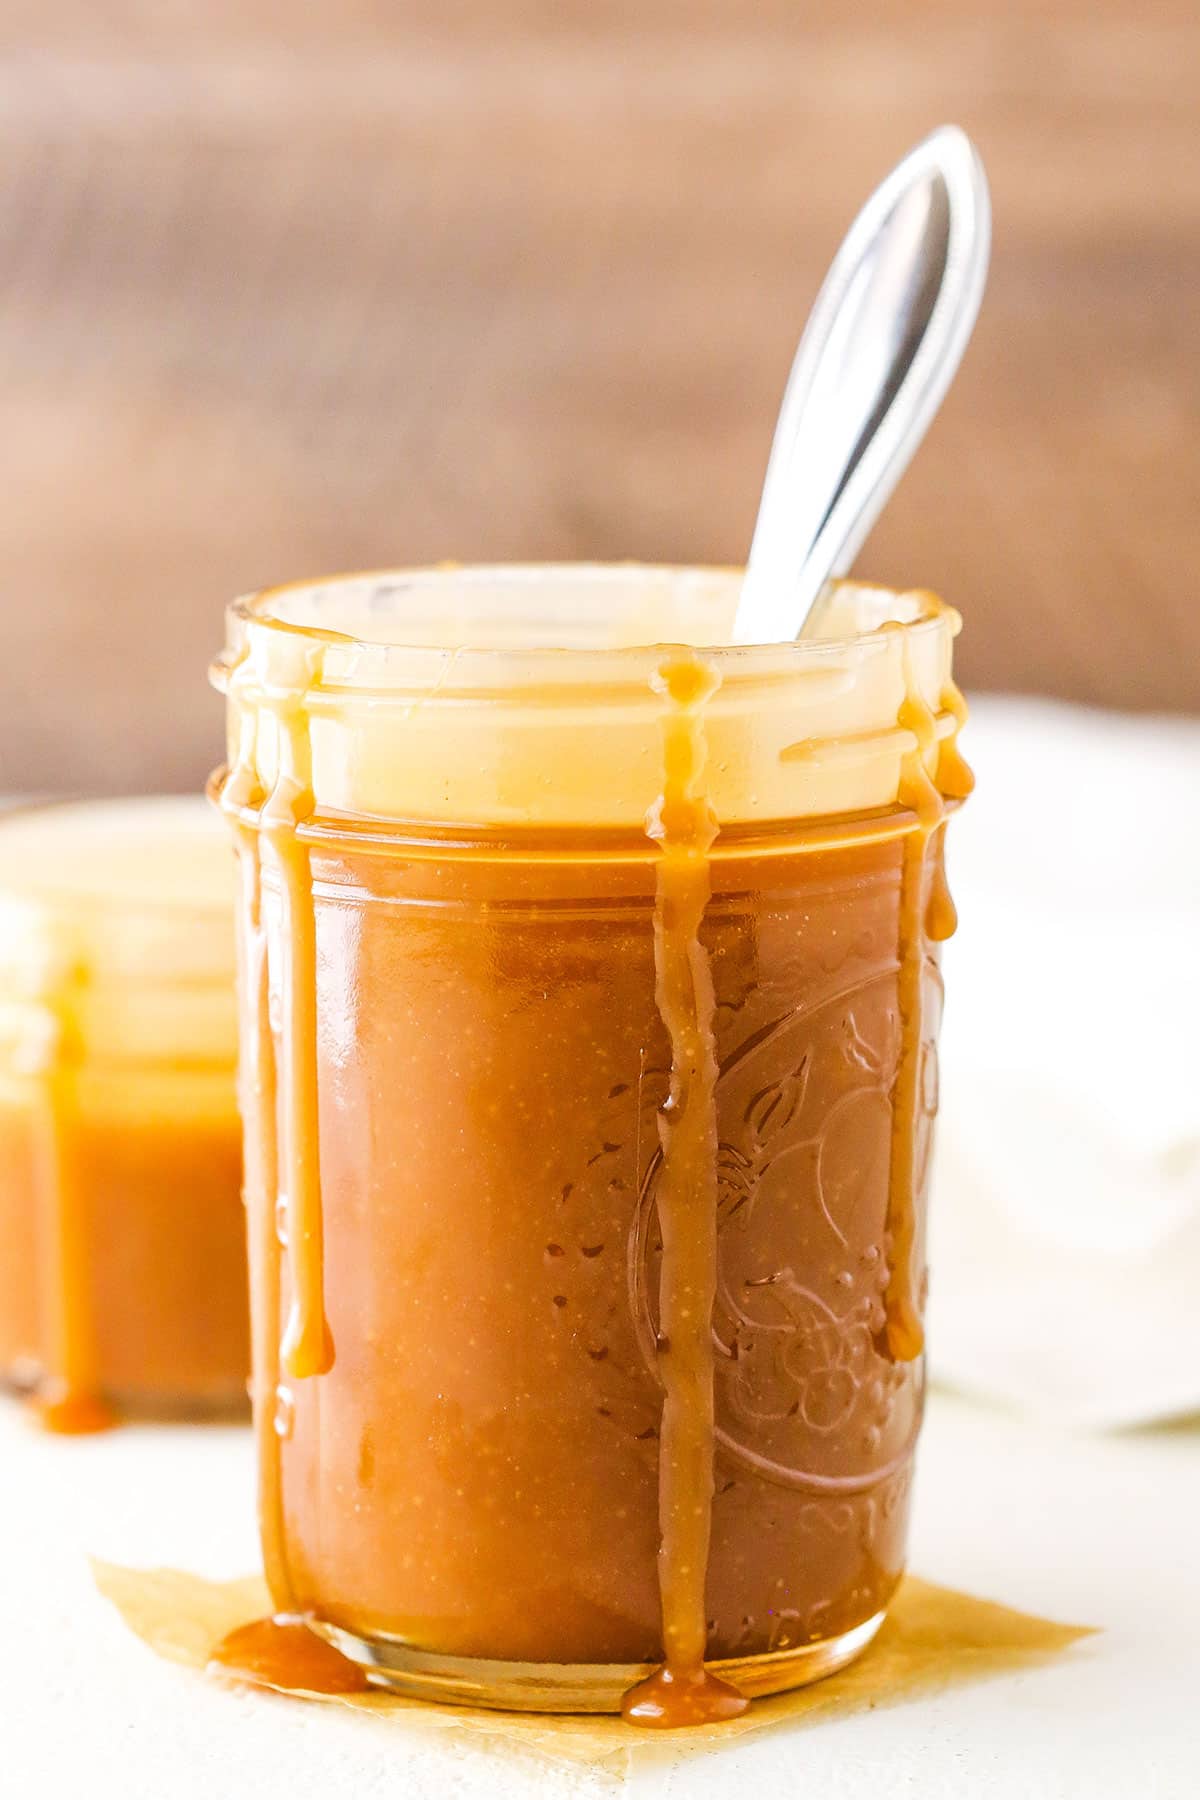 Salted Caramel Sauce in a clear glass jar with a spoon